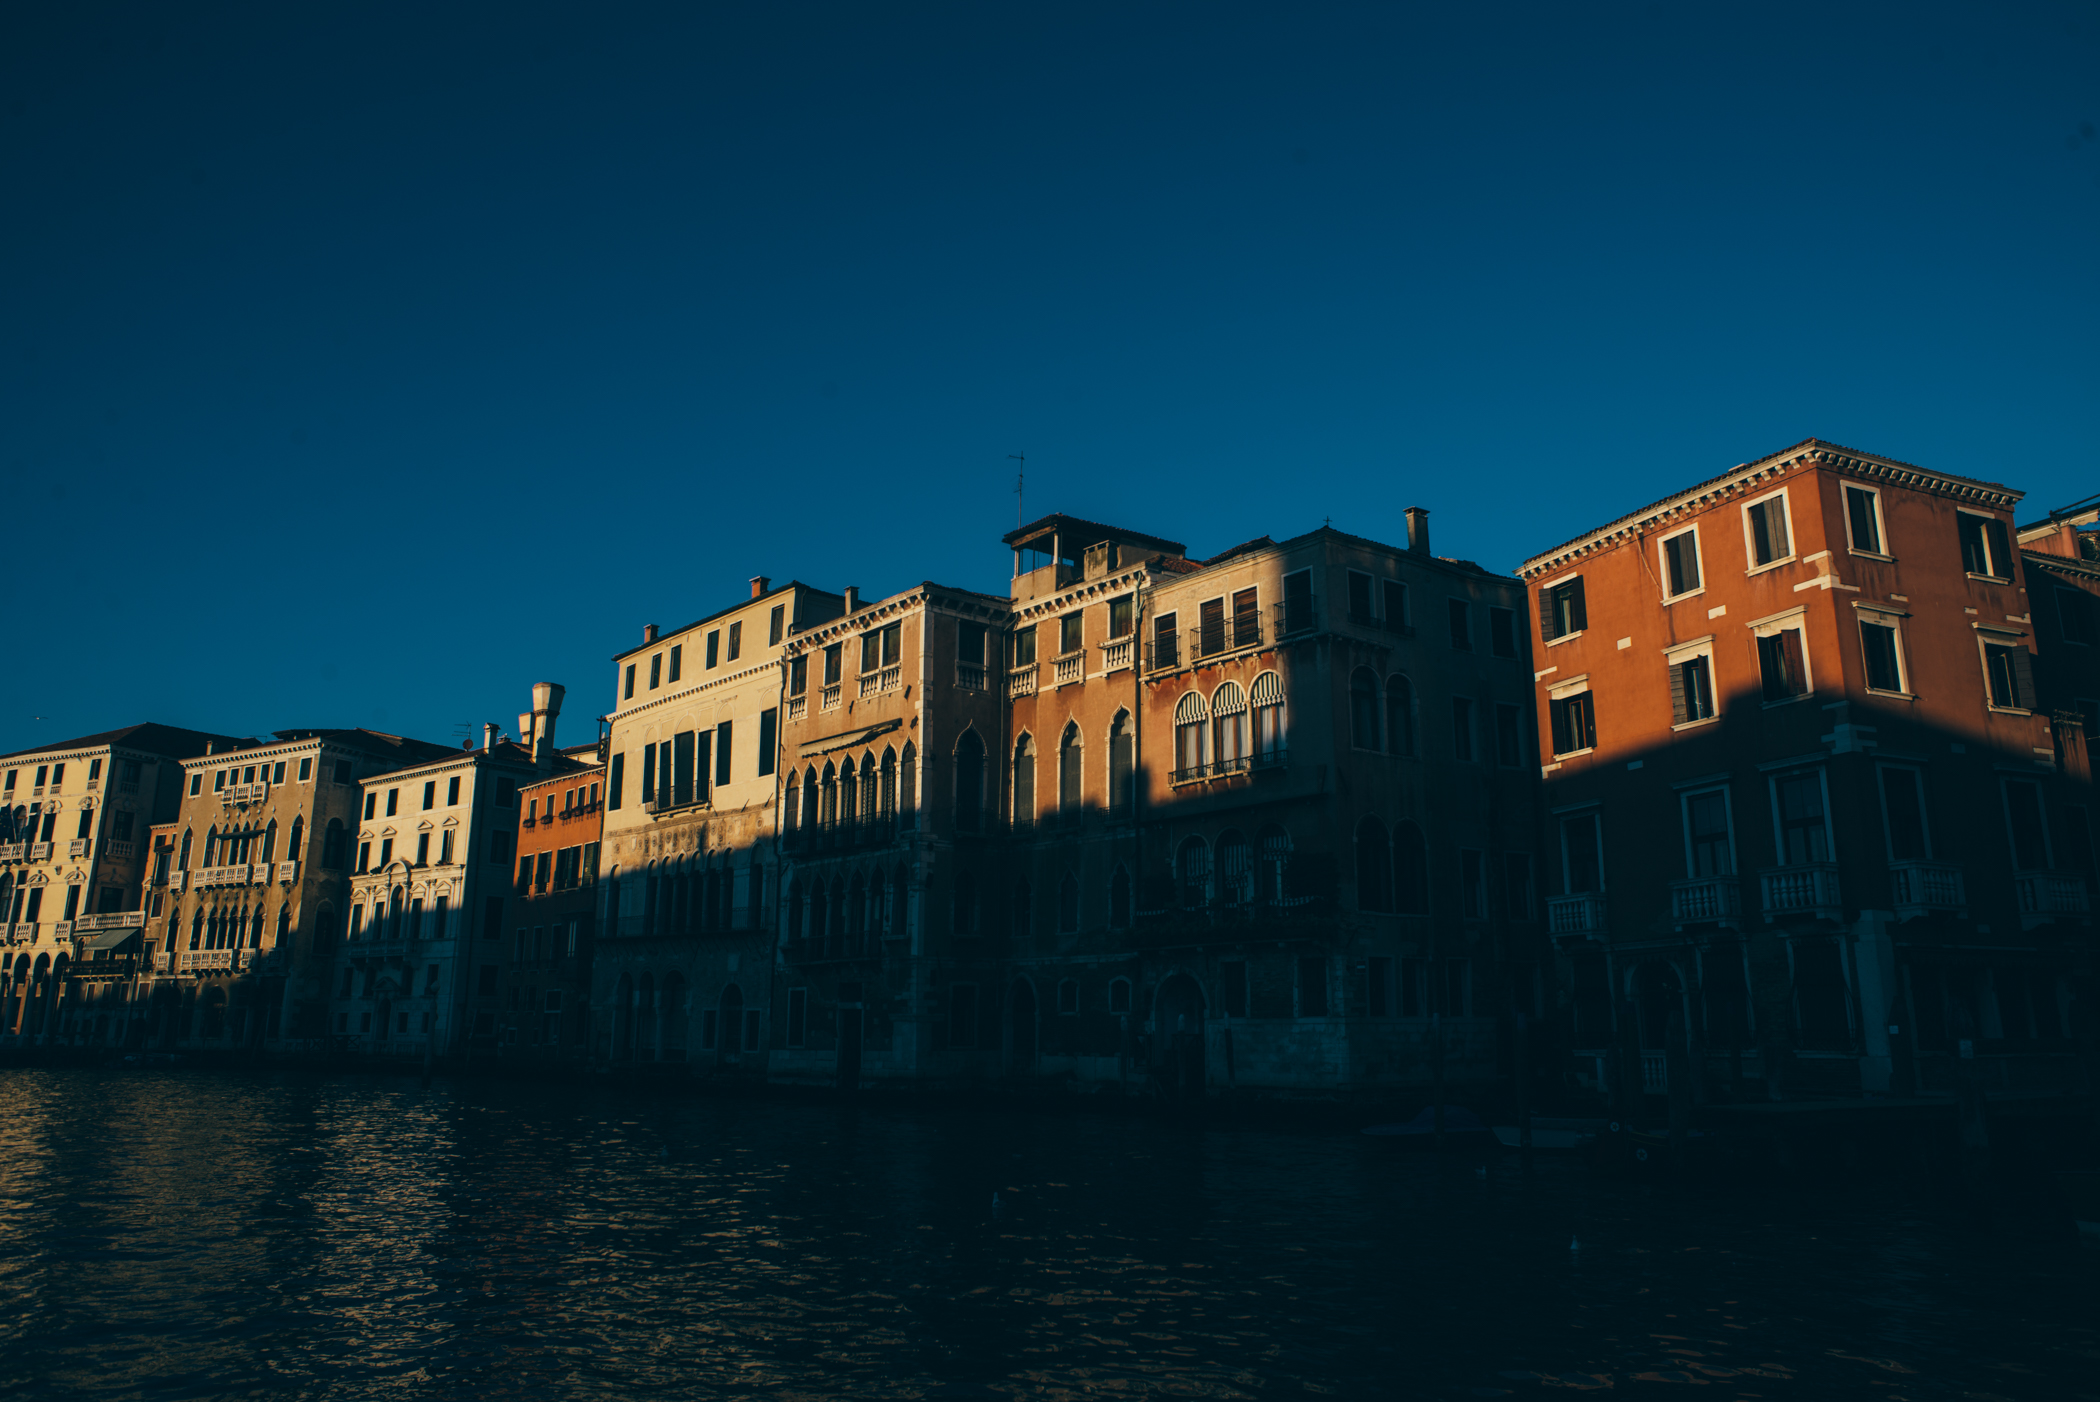 Sunset on the Grand Canal.